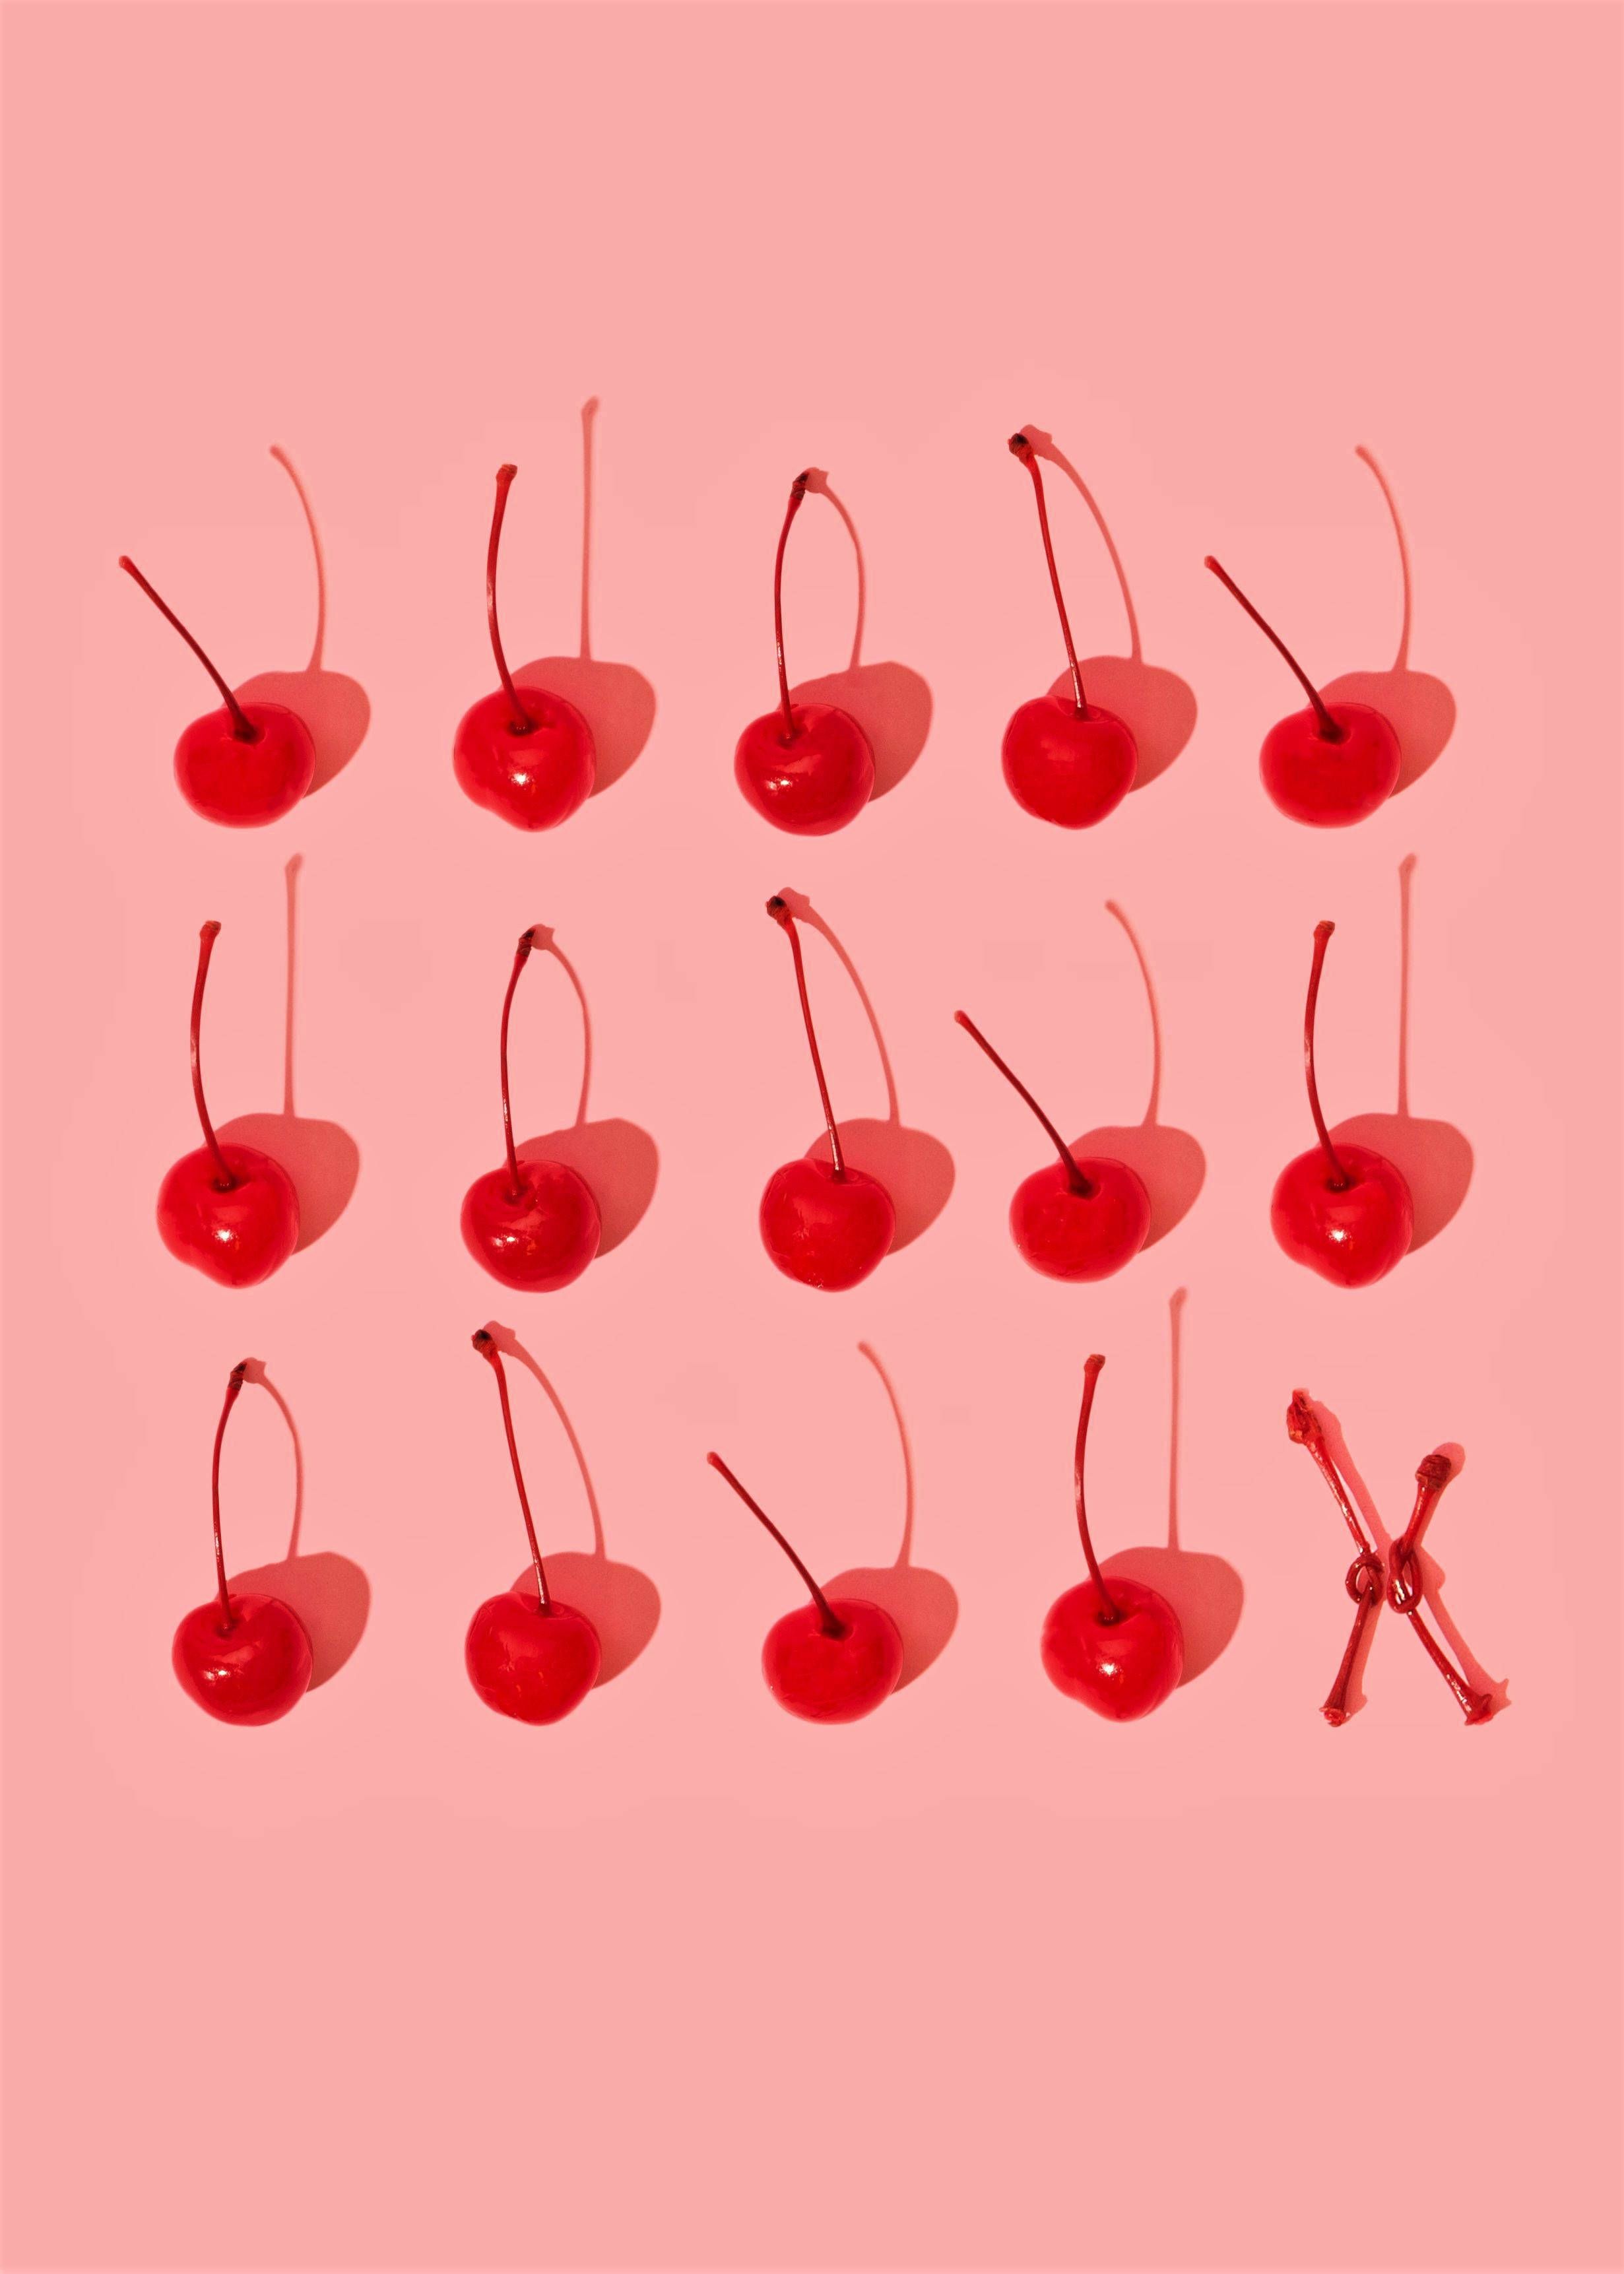 A pattern of cherries on a pink background - Red, cherry